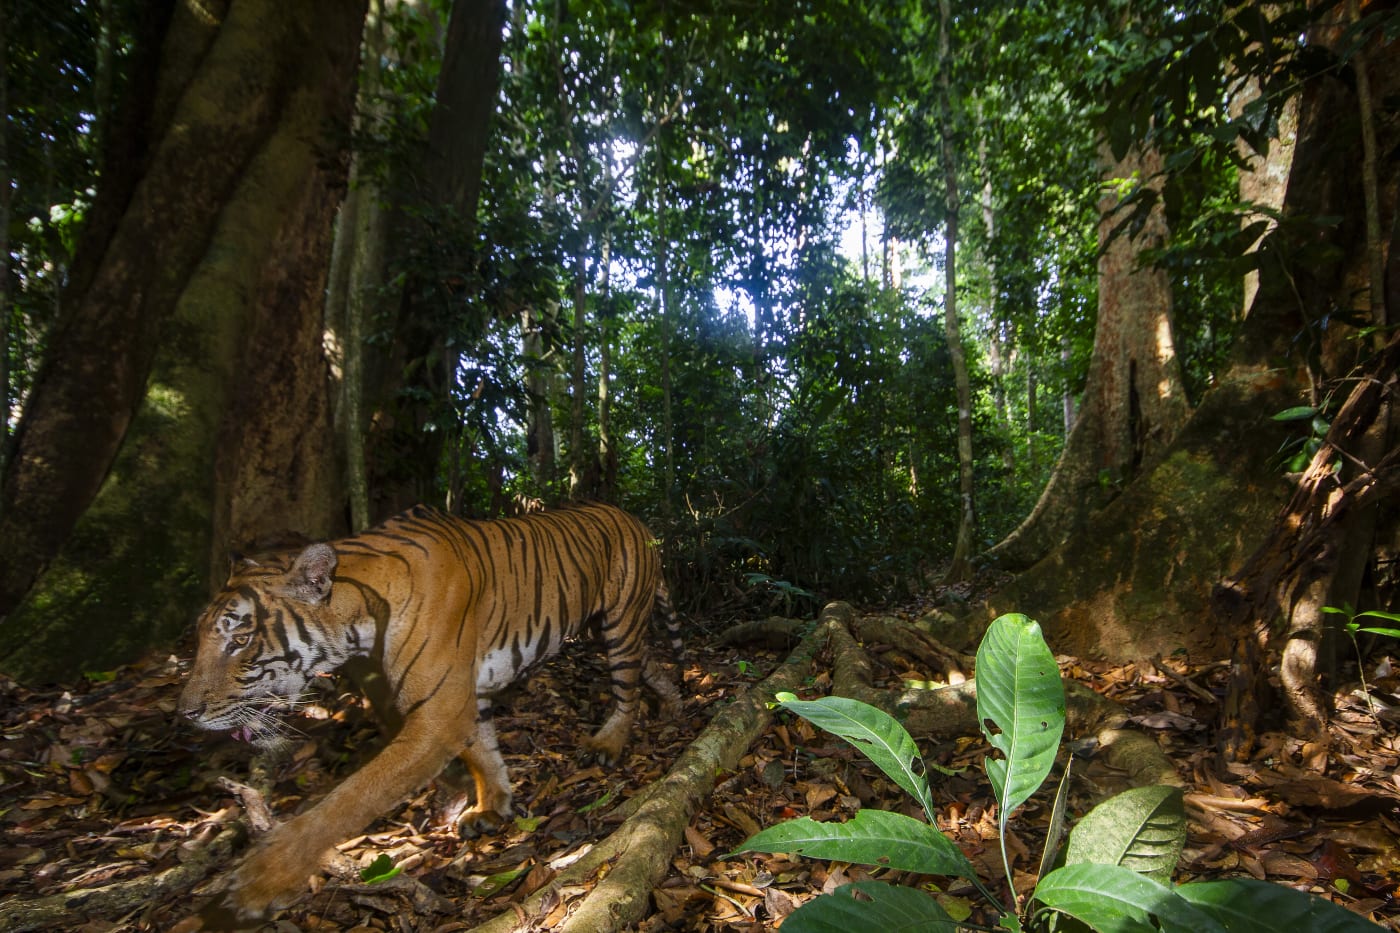 A tiger photographed by Emmanuel Rondeau using a custom built sensor cameras in Royal Belum State Park, Malaysia